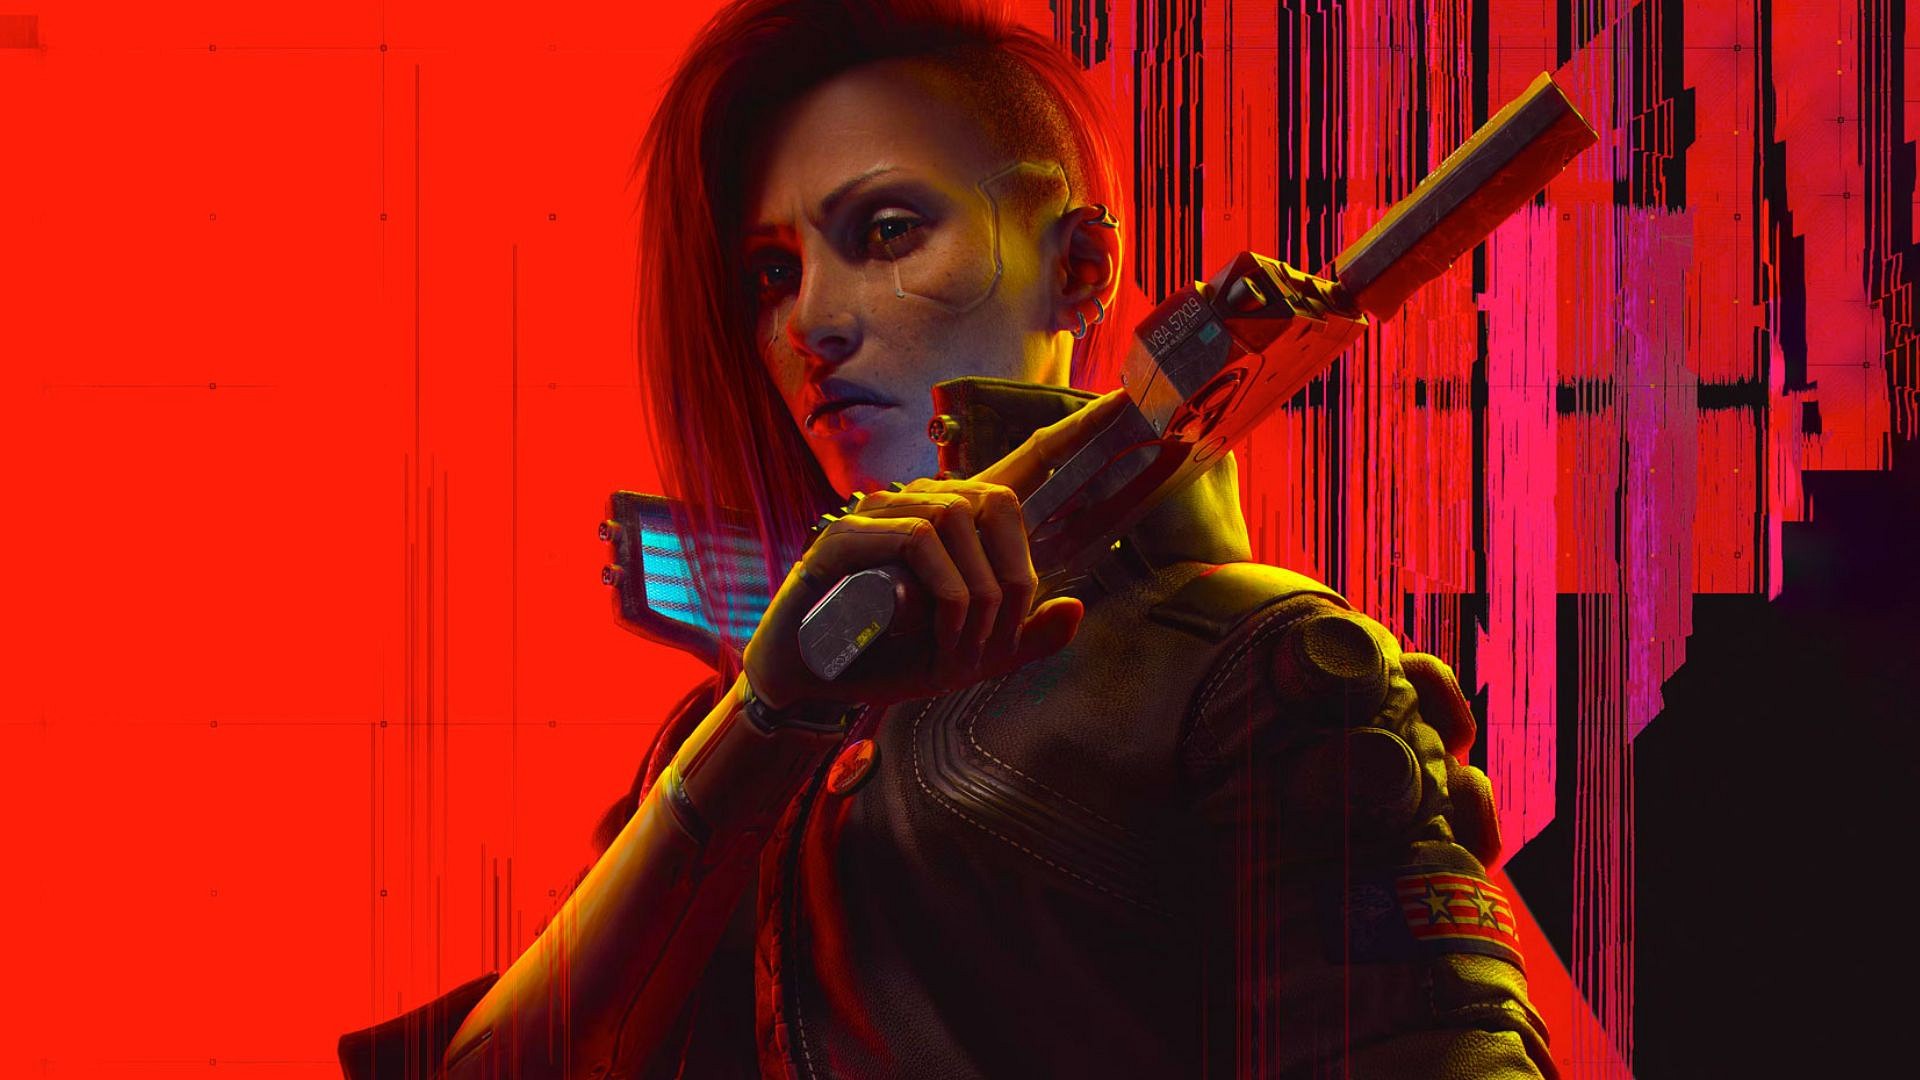 Cyberpunk 2077 Patch 1.62 with Ray Tracing: Overdrive Mode is finally here